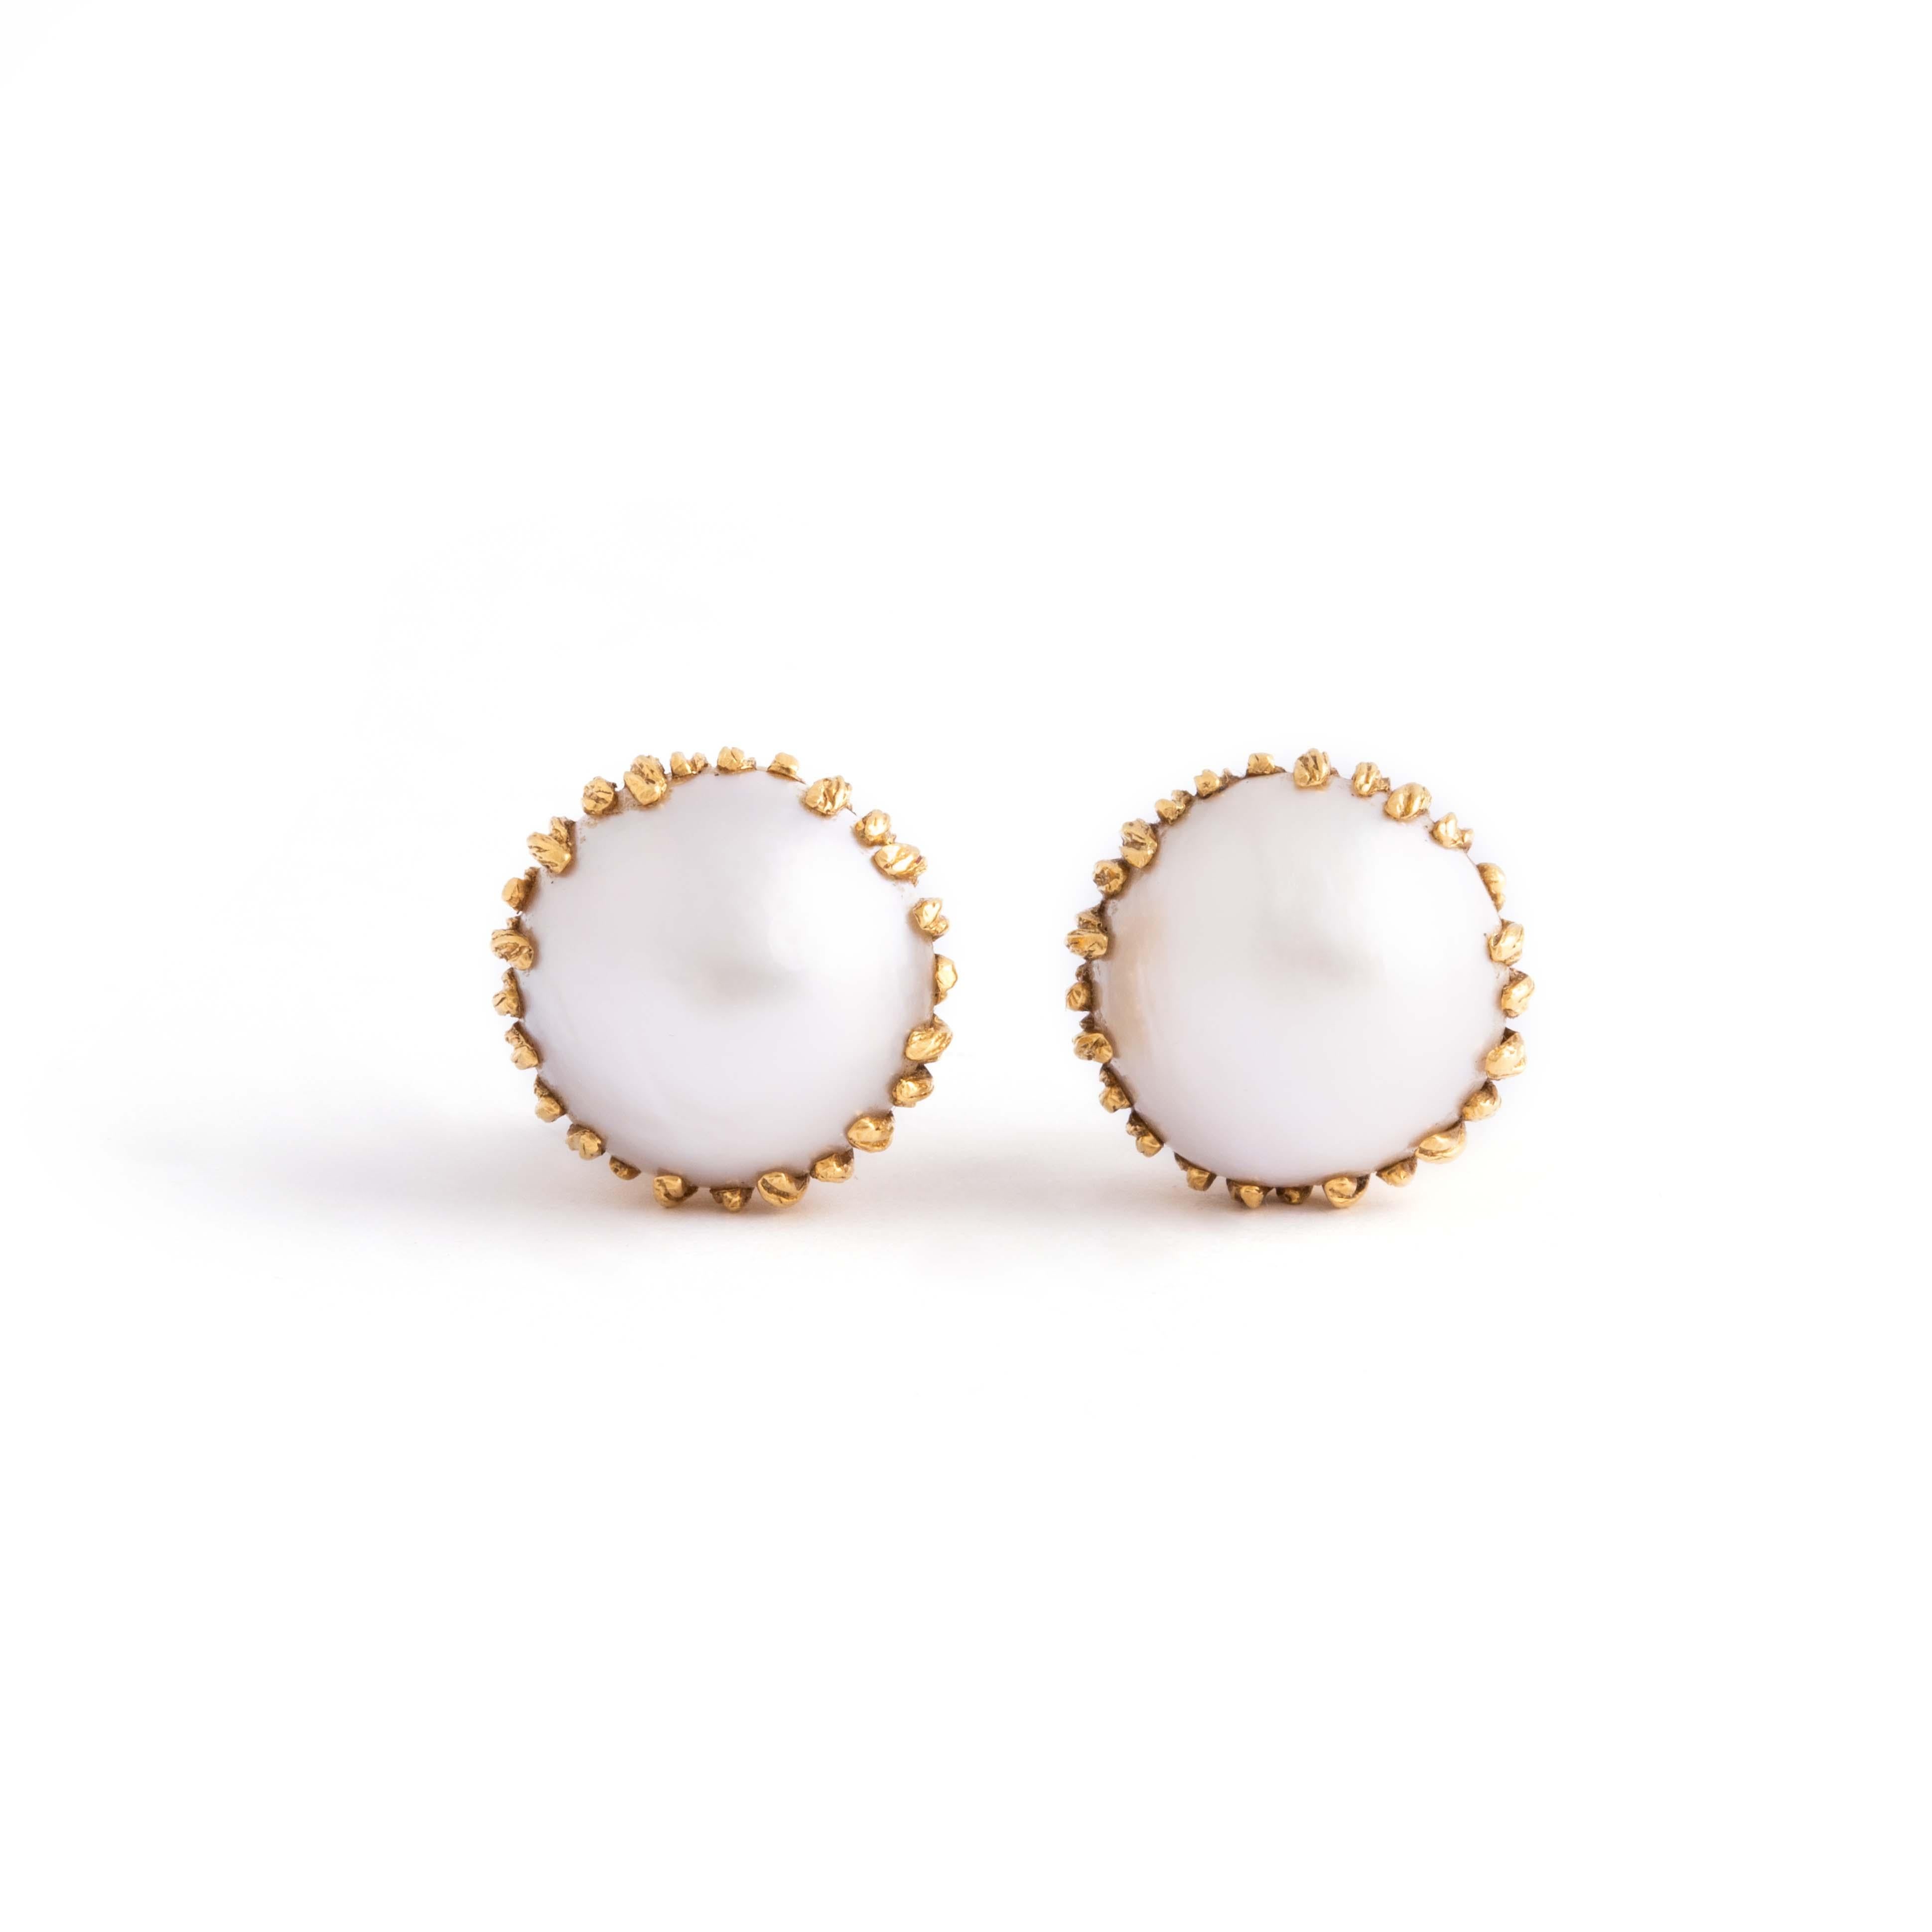 Pair of 18K yellow gold earrings holding respectively a half cultured pearl.
Diameter: 1.80 centimeters. 
Gross weight: 16.19 grams.